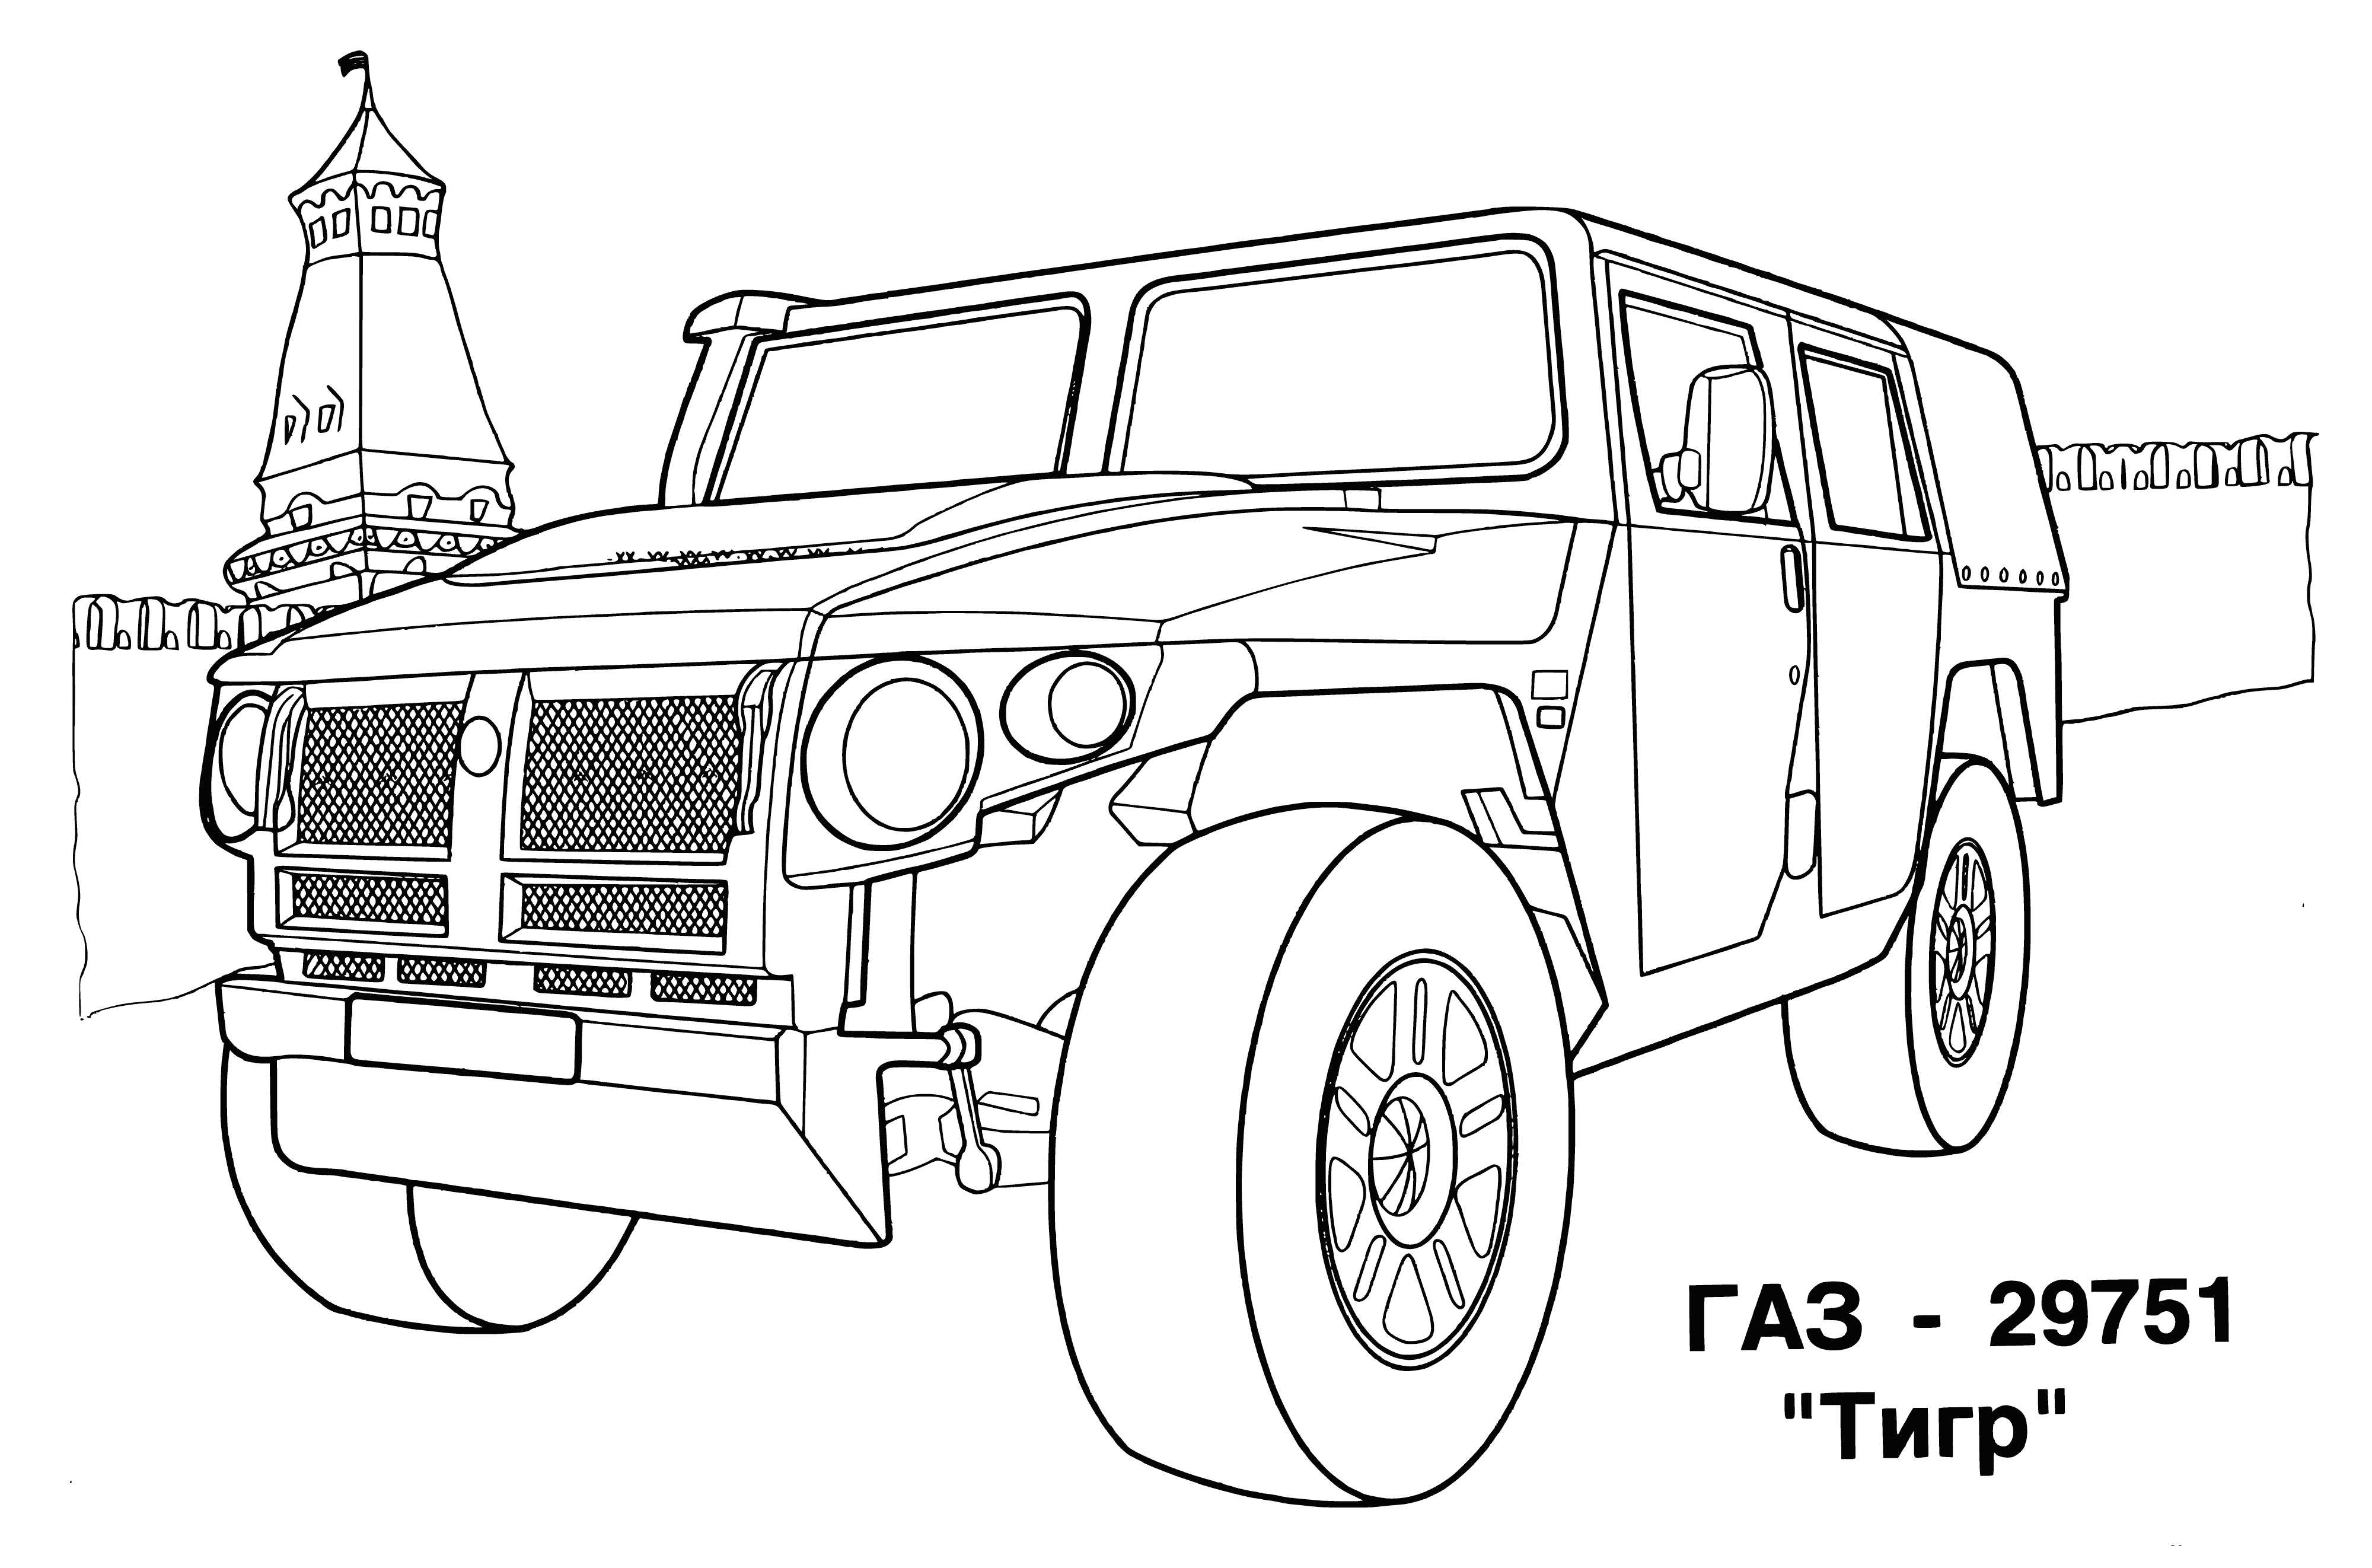 coloring page: Two silver jeeps w/ 4 doors parked side by side in a lot. #coloring #automobiles